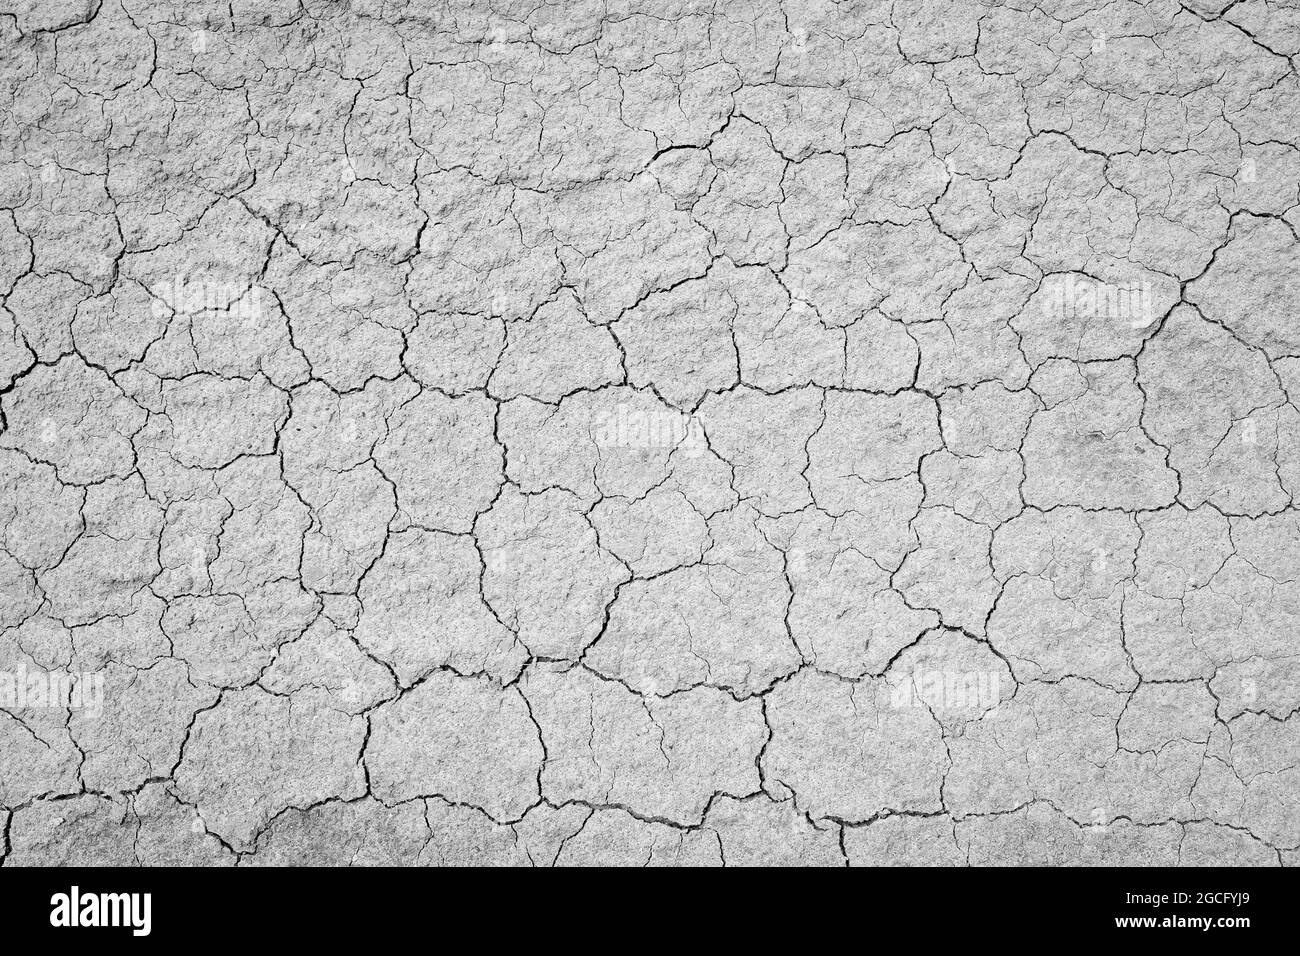 Faded texture of very dry and cracked earth. Drought or lack of water concept. Stock Photo